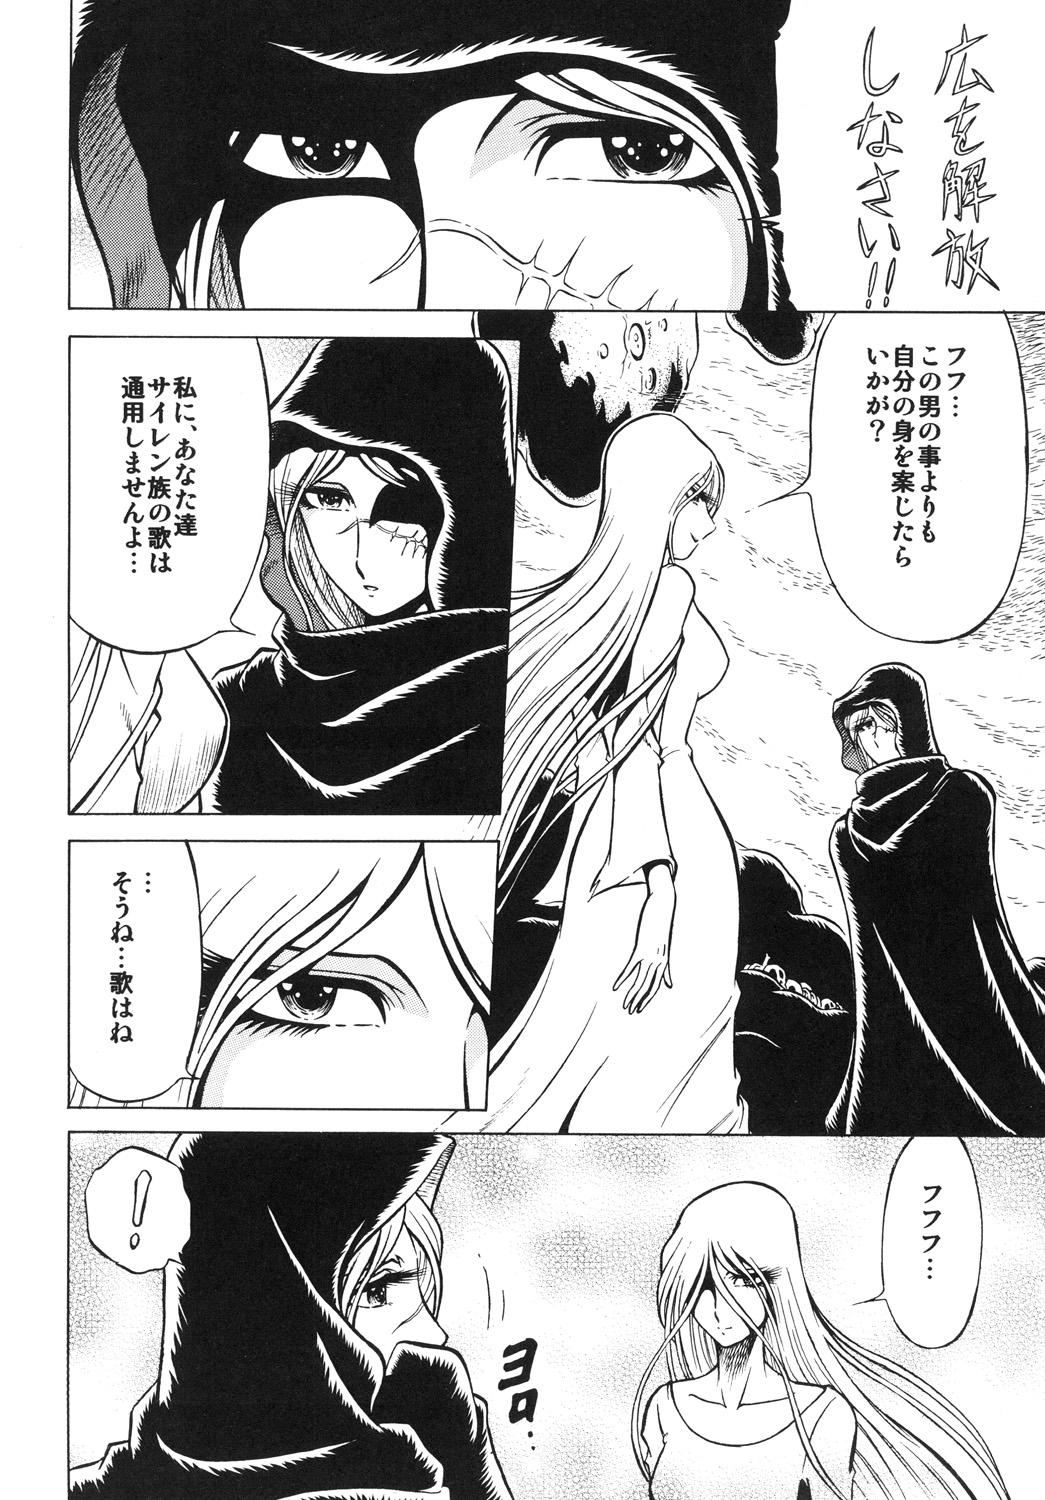 Pussy Fucking NightHead+2 - Space pirate captain harlock Viet - Page 11